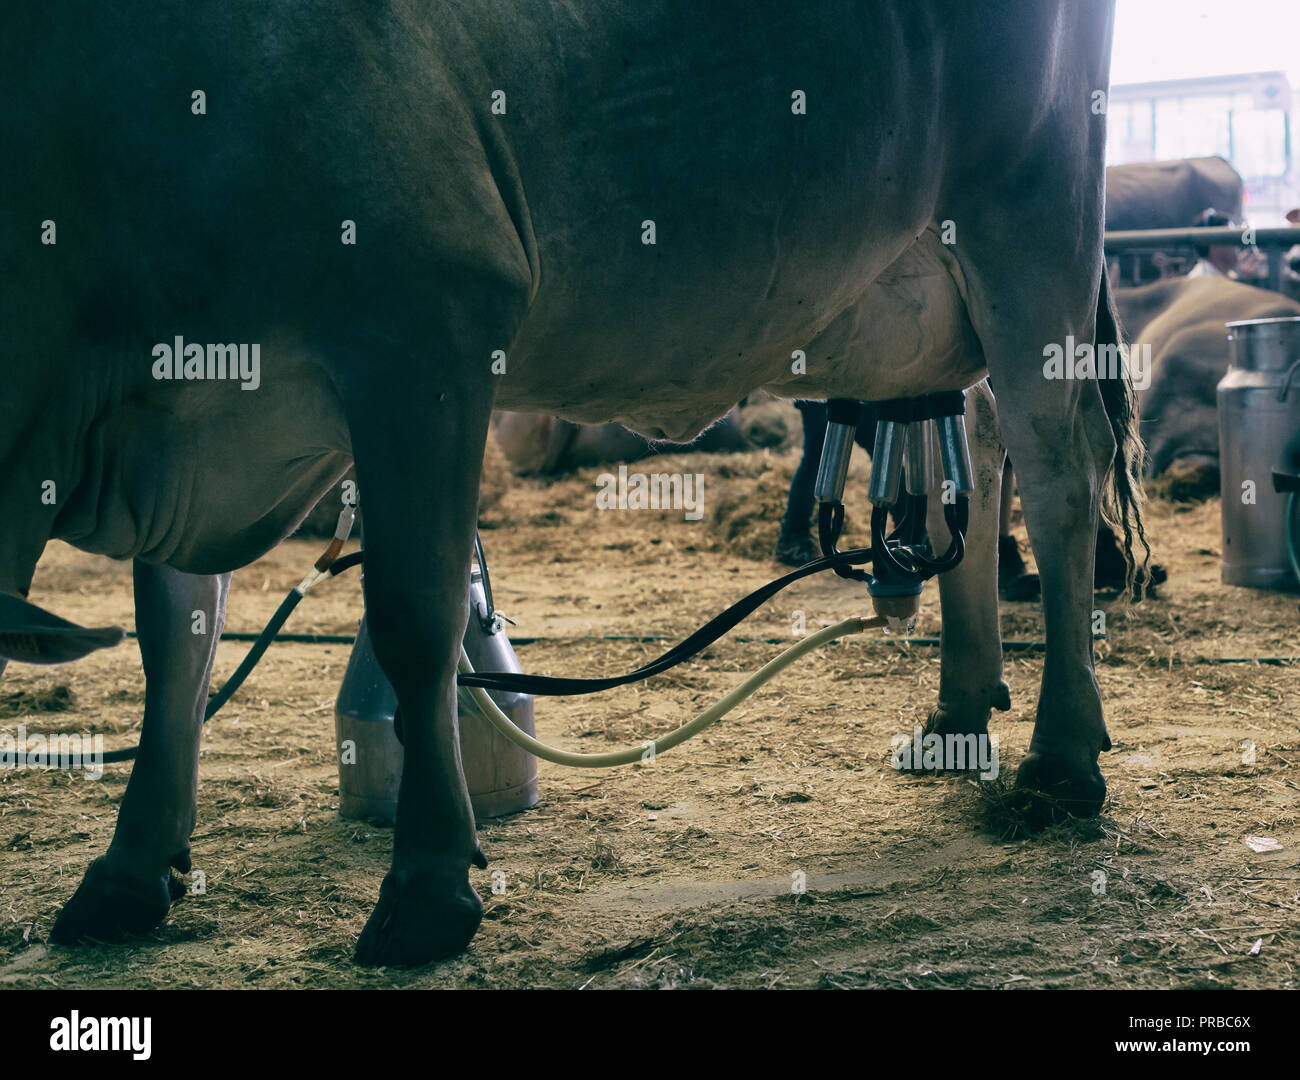 Cow milking facility and mechanized milking equipment Stock Photo